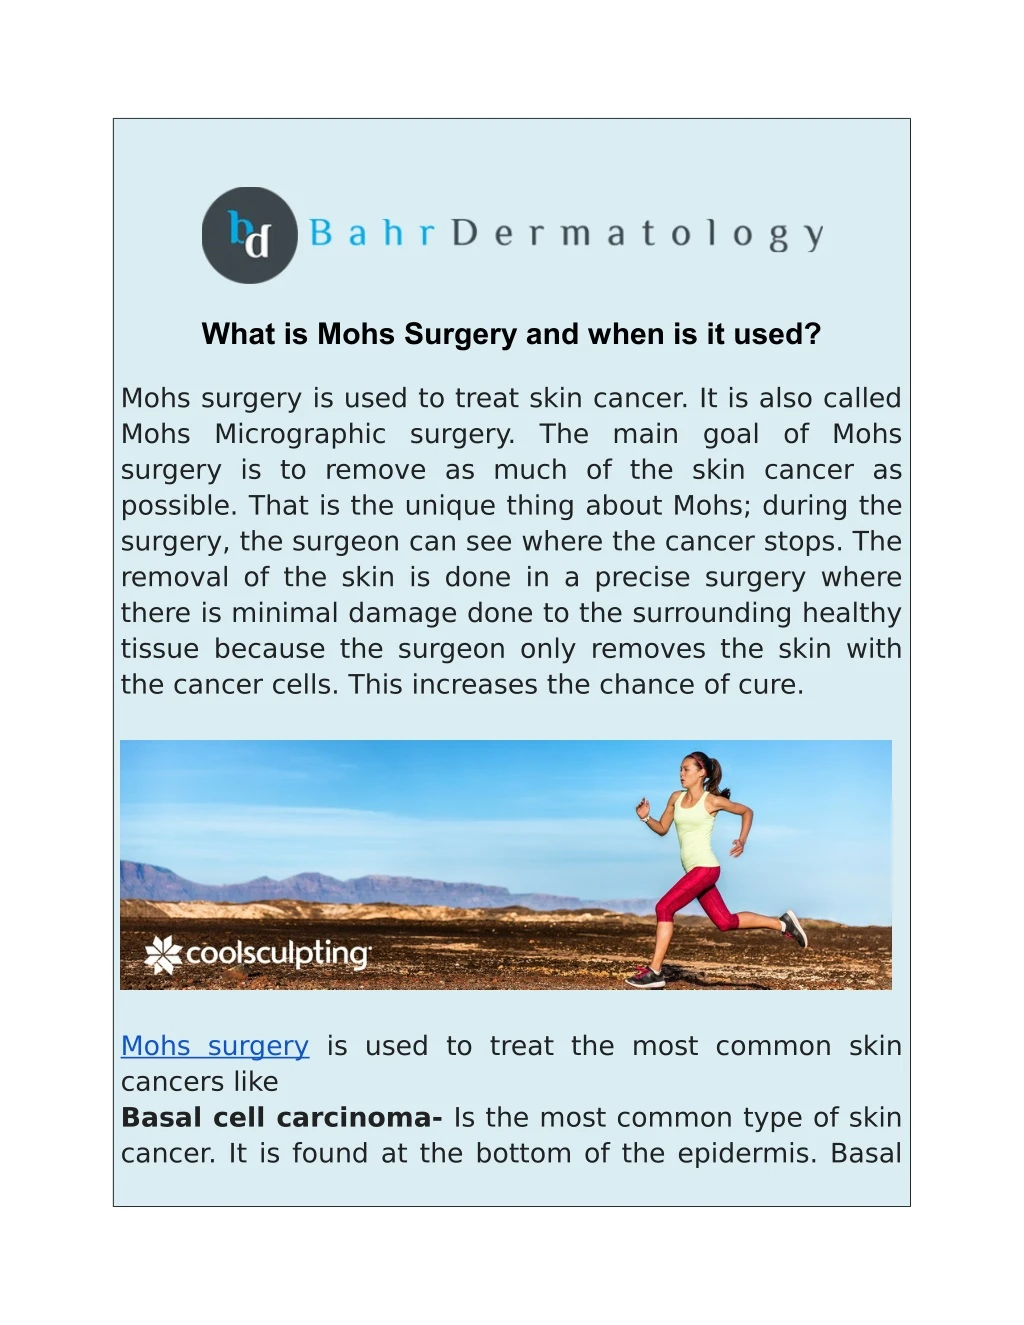 what is mohs surgery and when is it used